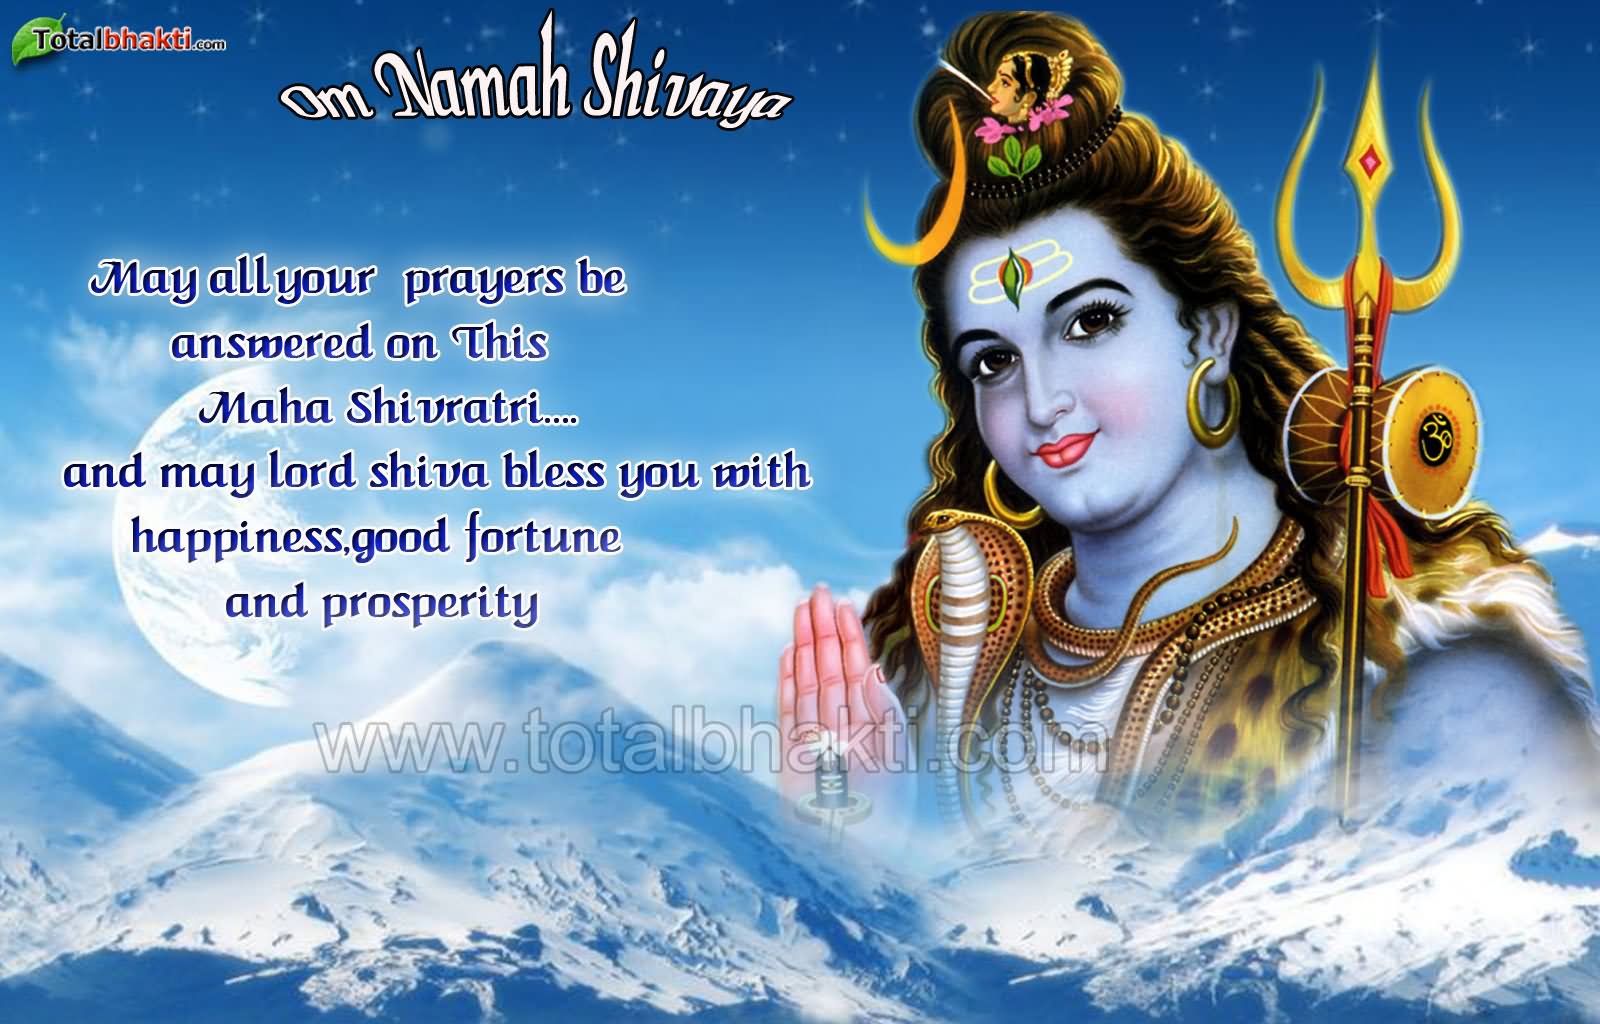 May All Your Prayers Be Answered On This Maha Shivratri